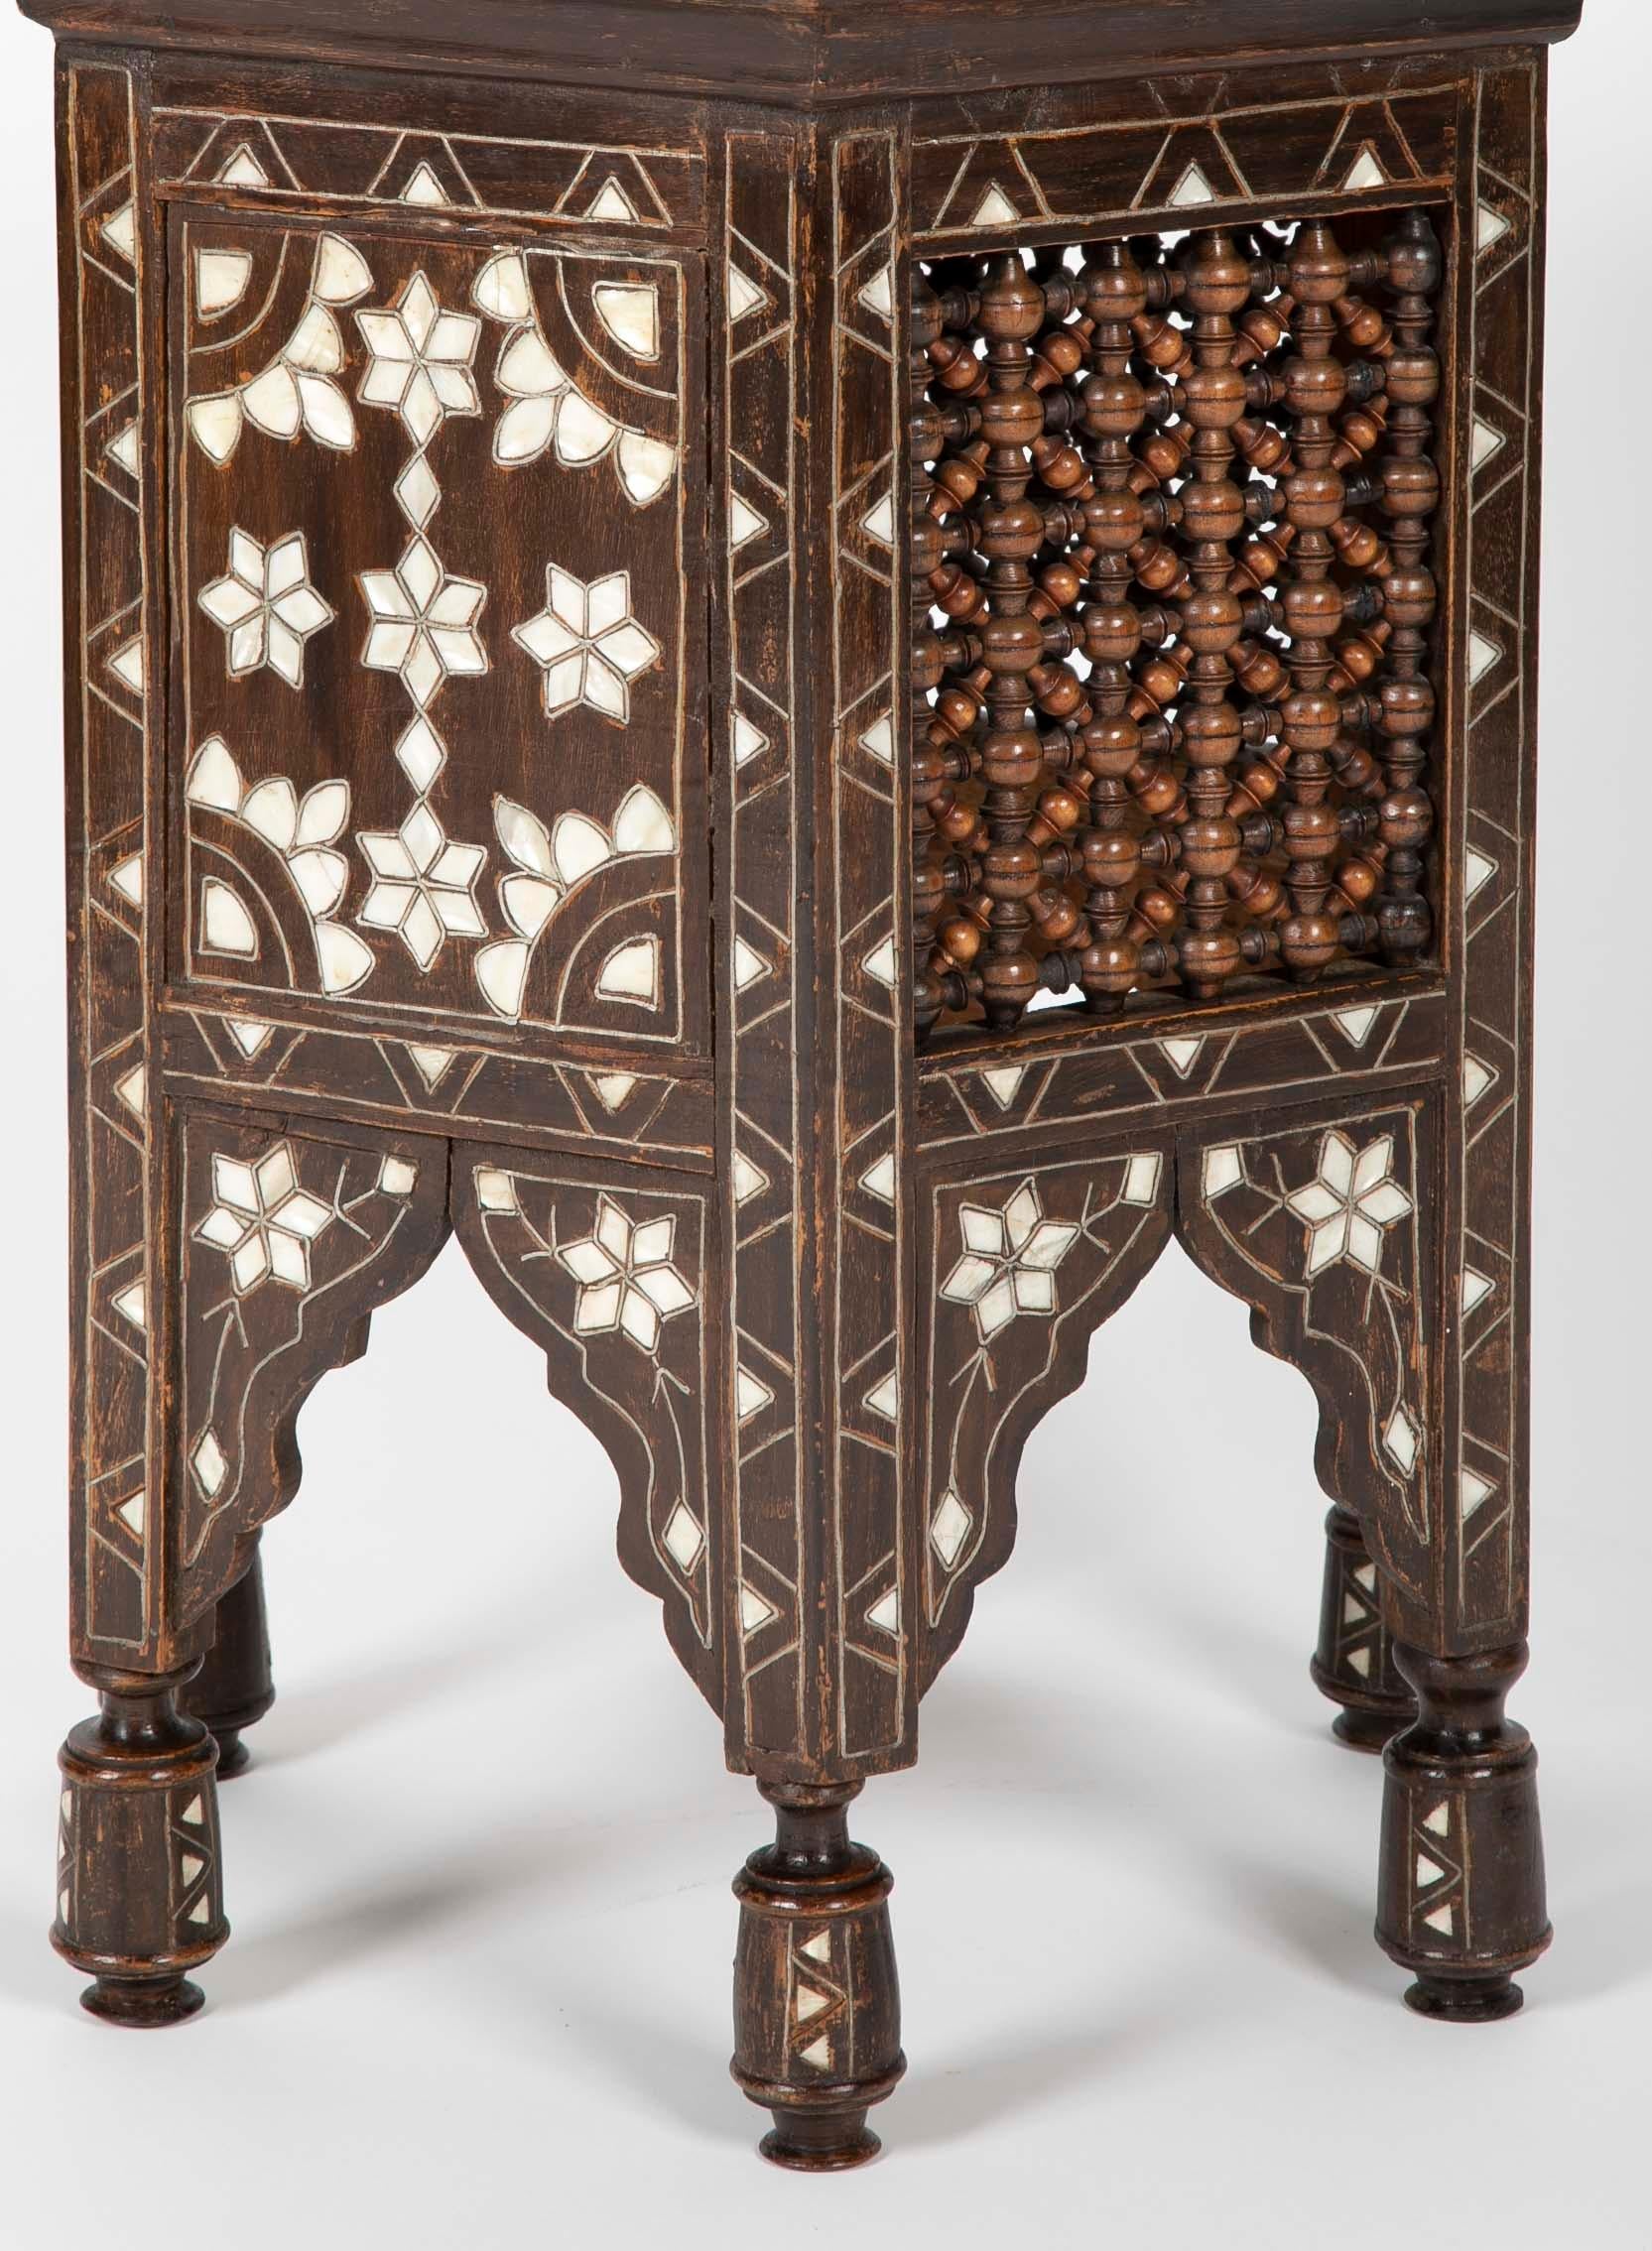 Turkish Ottoman Mother-of-Pearl and Bone Inlaid Side Table